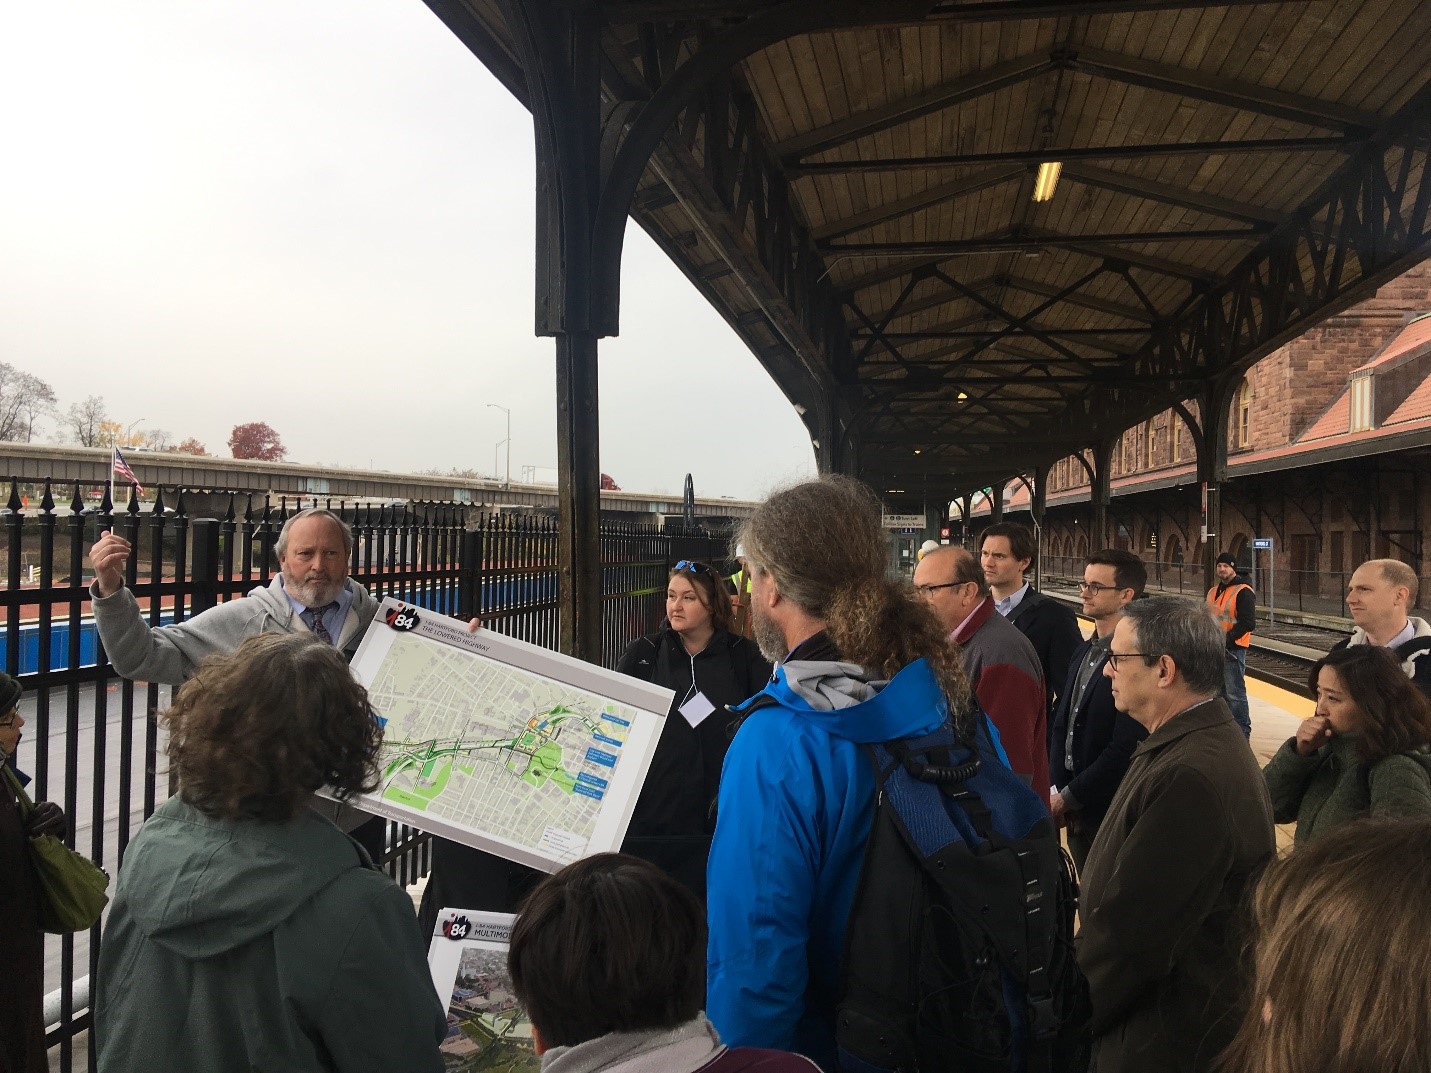 Conference participants viewing the I-84 viaduct in Downtown Hartford